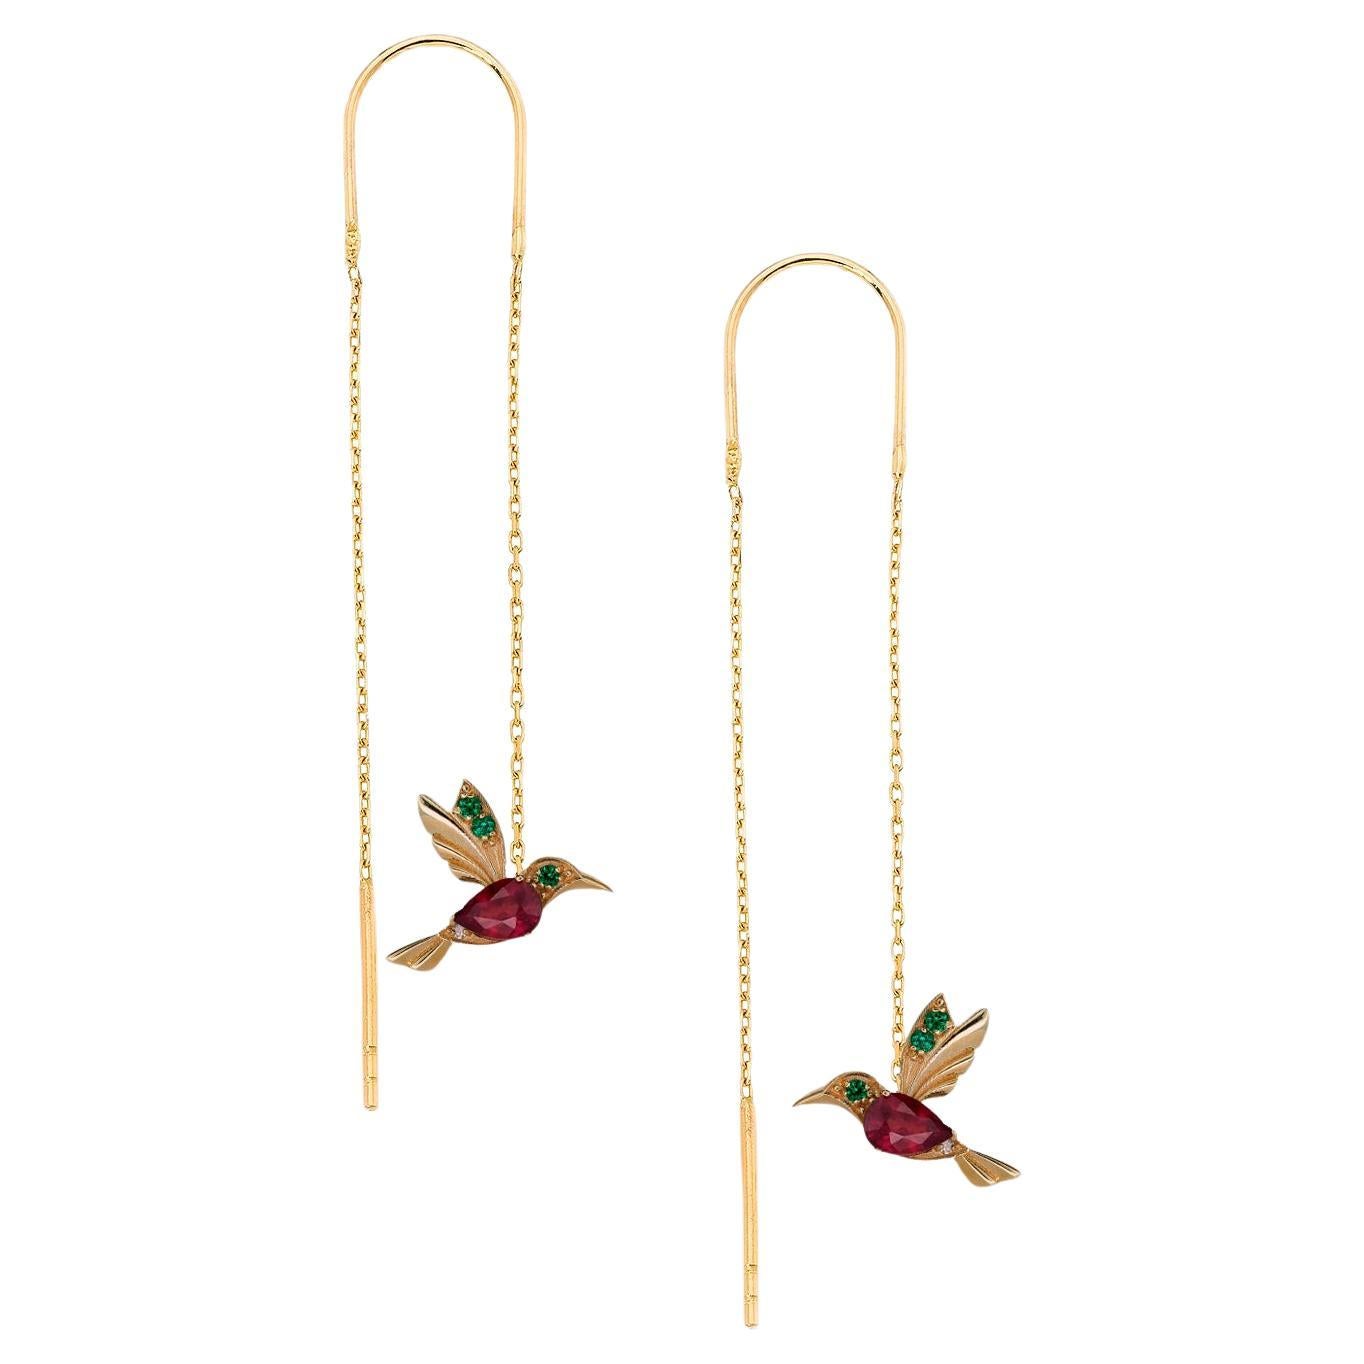 Hummingbird Threader earrings with rubies in 14k gold.  For Sale